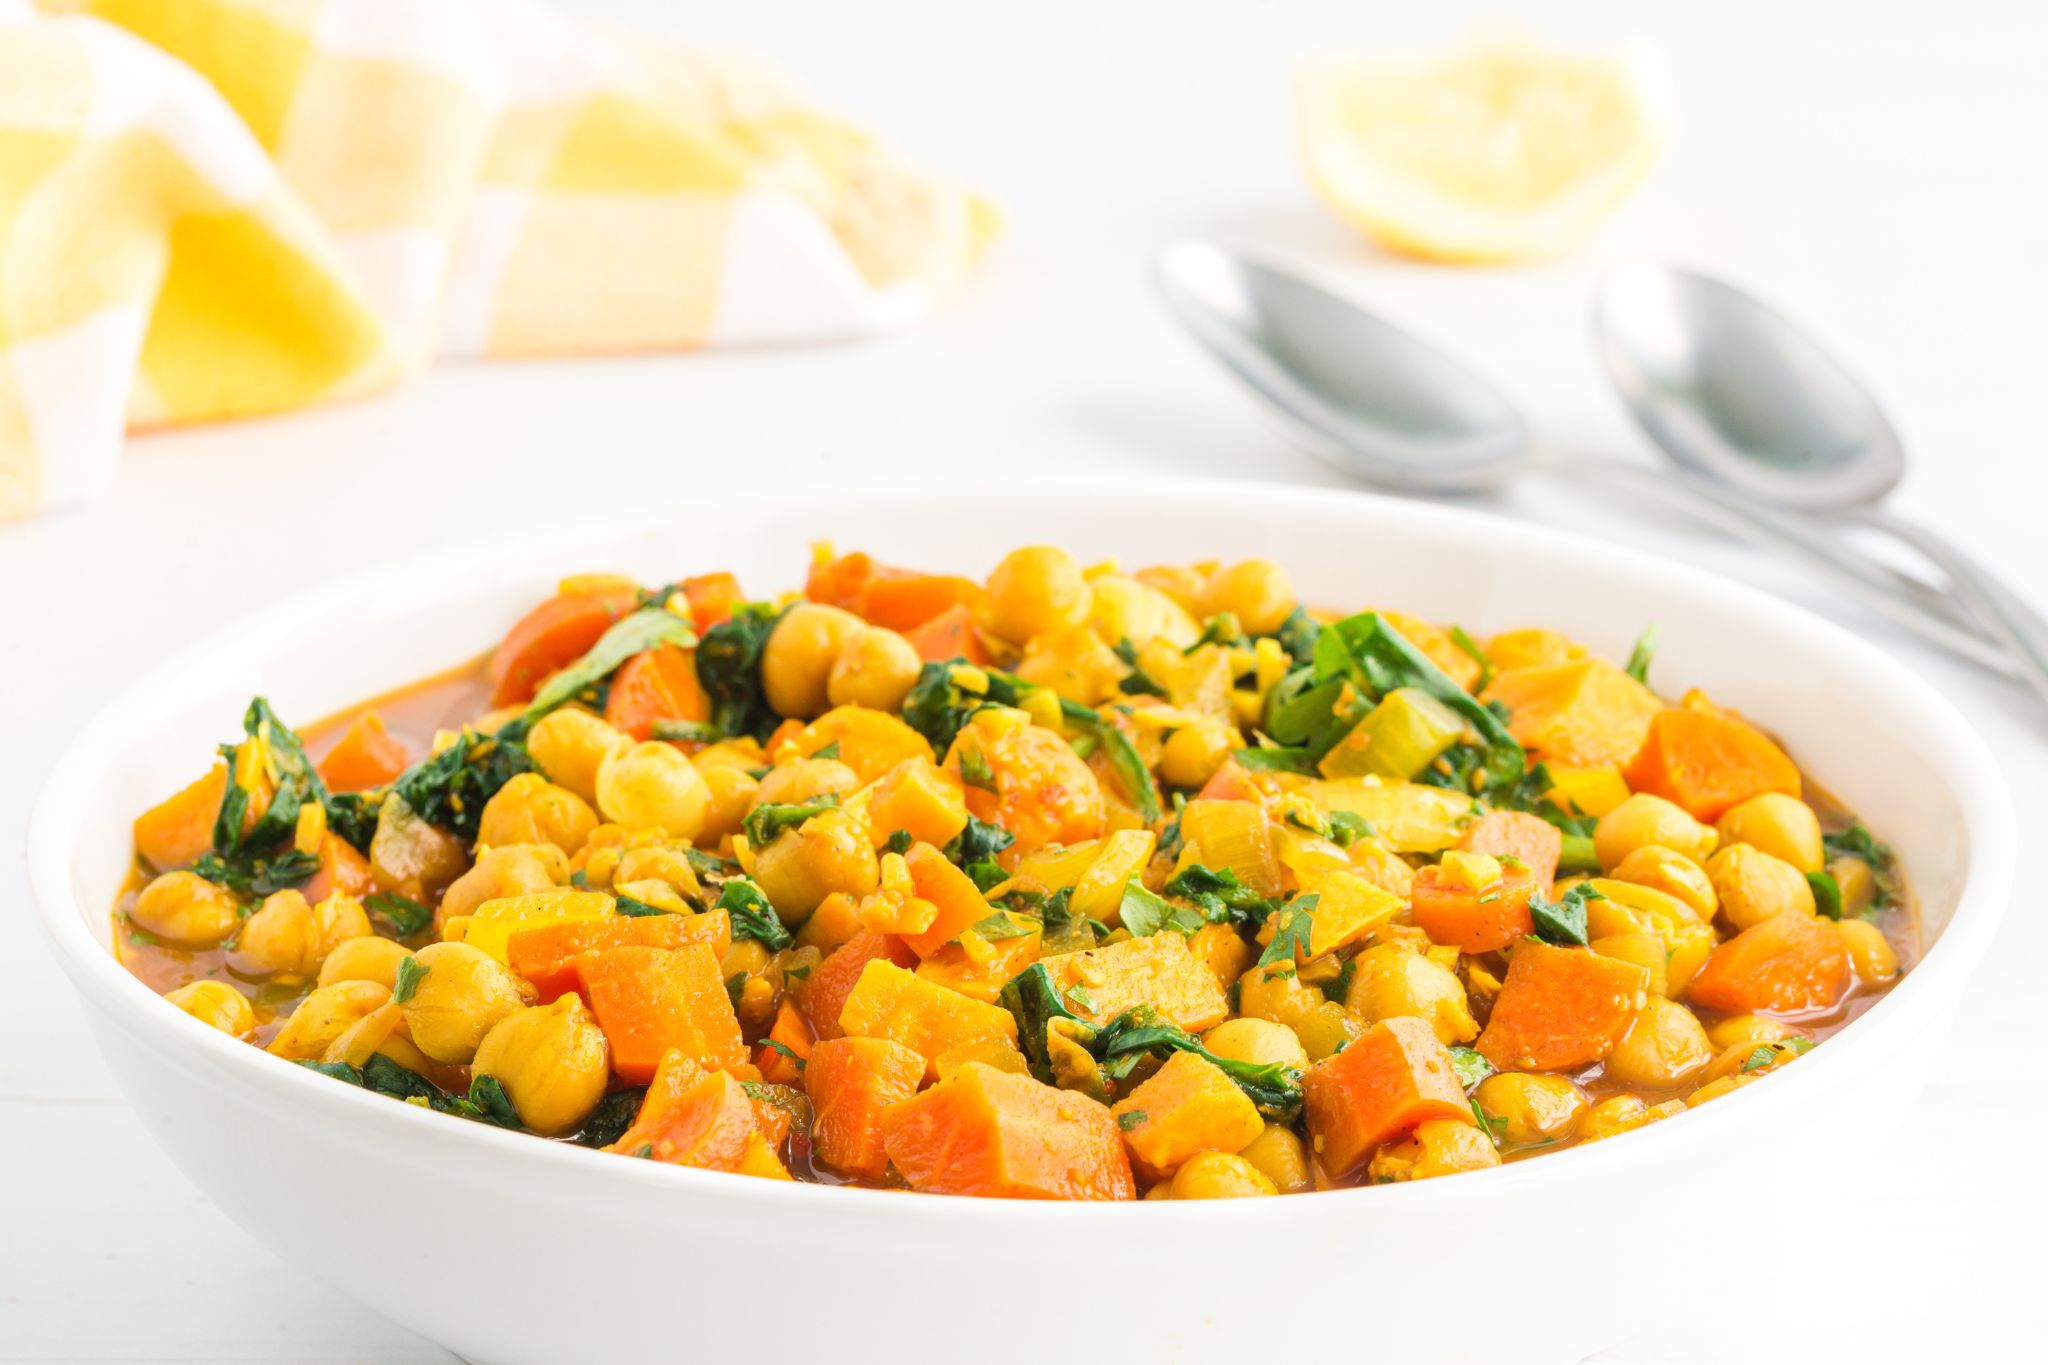 Moroccan Spiced Sweet Potato, Chickpea, and Spinach Stew